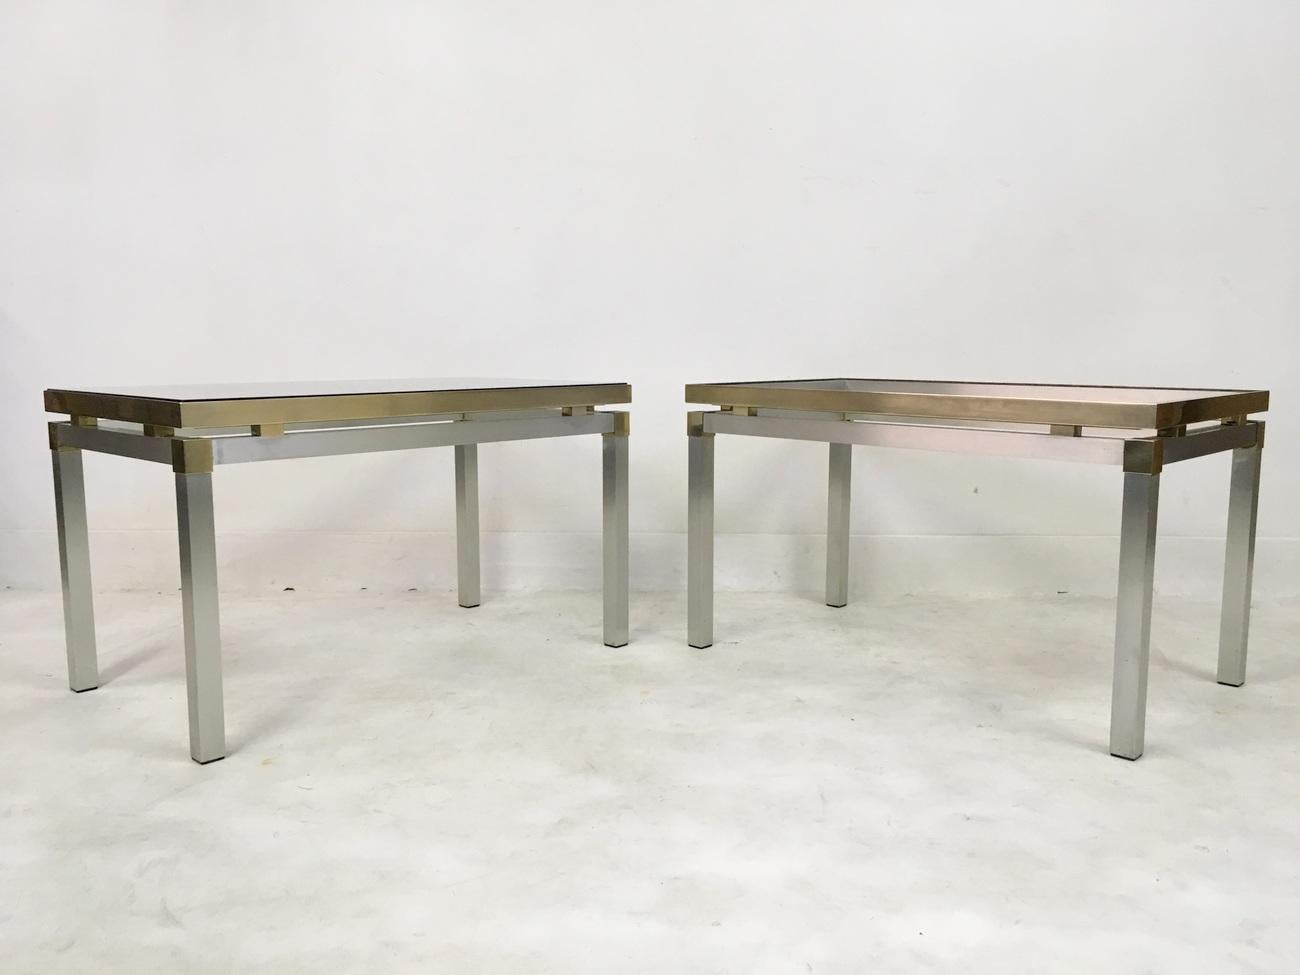 Vintage 1970s Italian Aluminium and Brass Side Tables In Good Condition For Sale In London, London